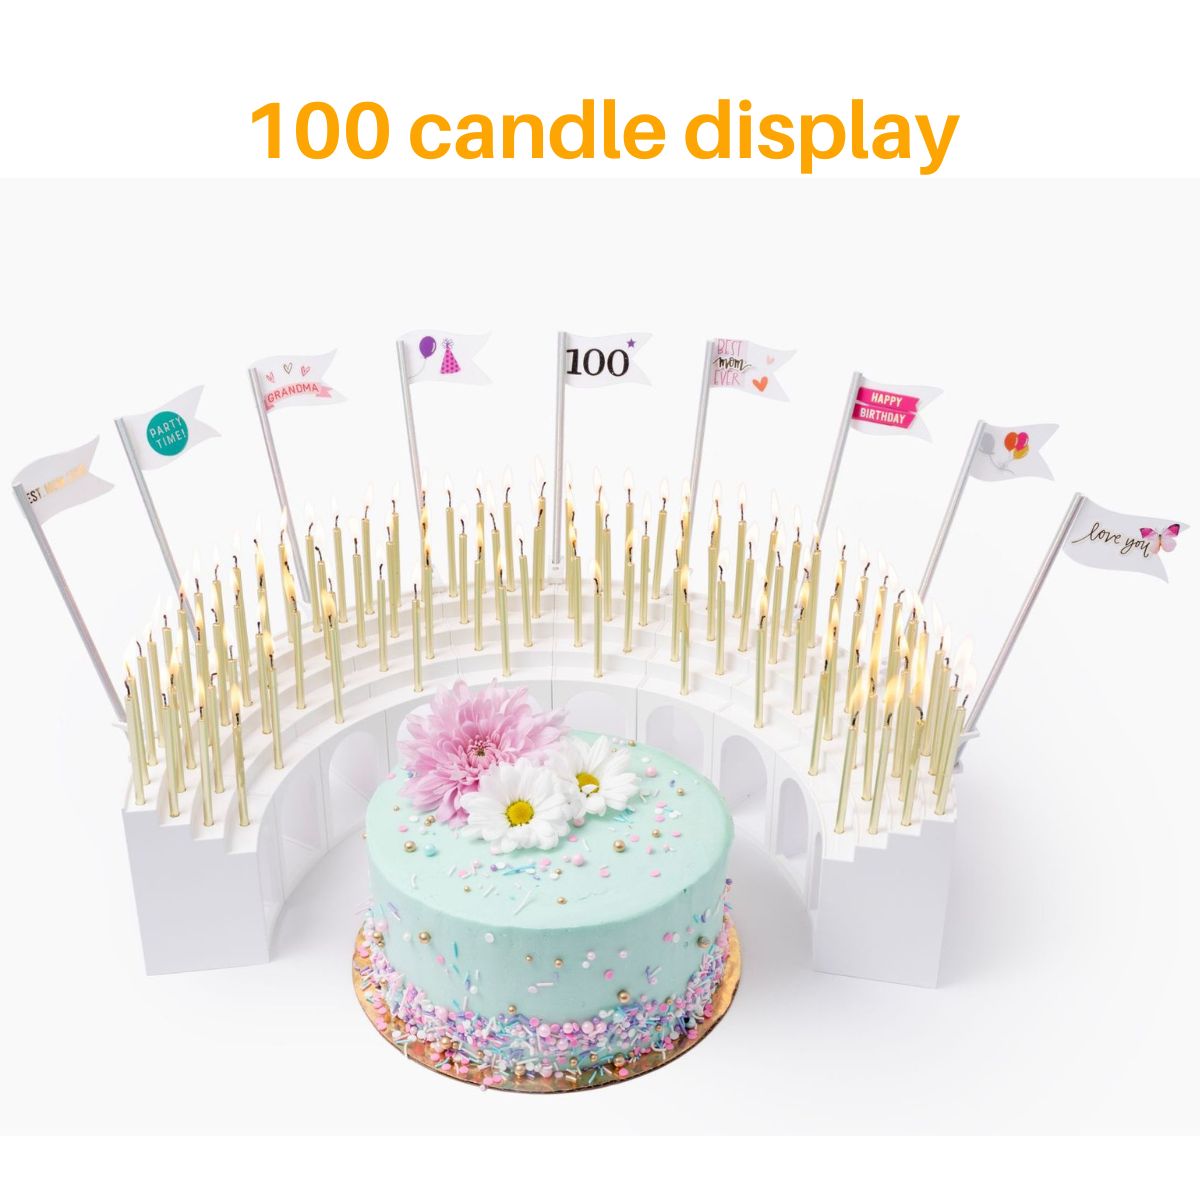 Birthday candle Grandstand with 100 candle display